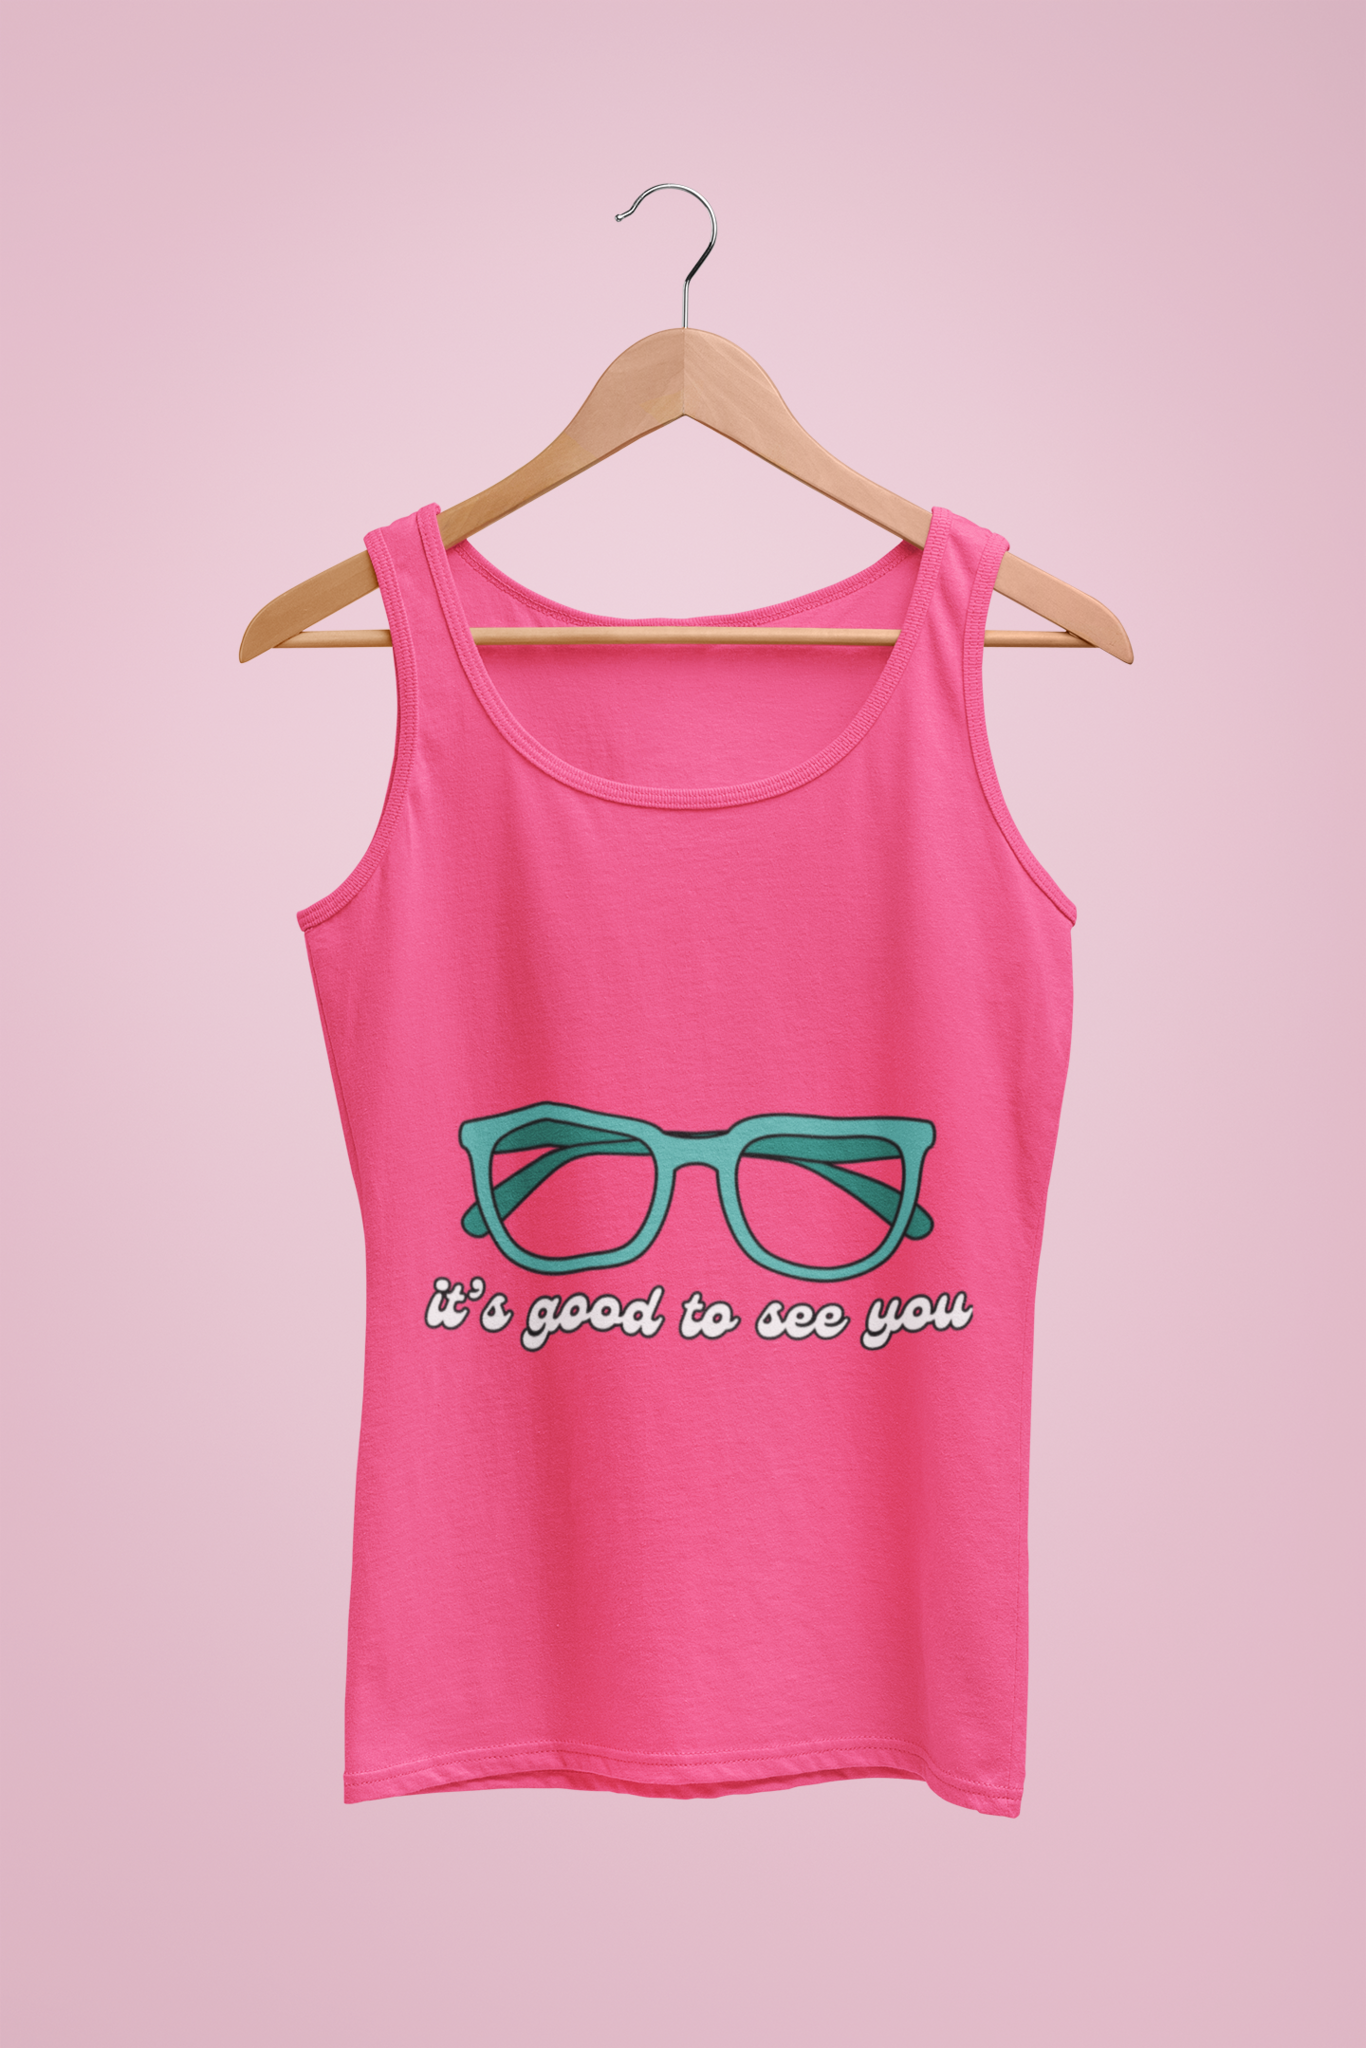 Women's Tank Top: See you